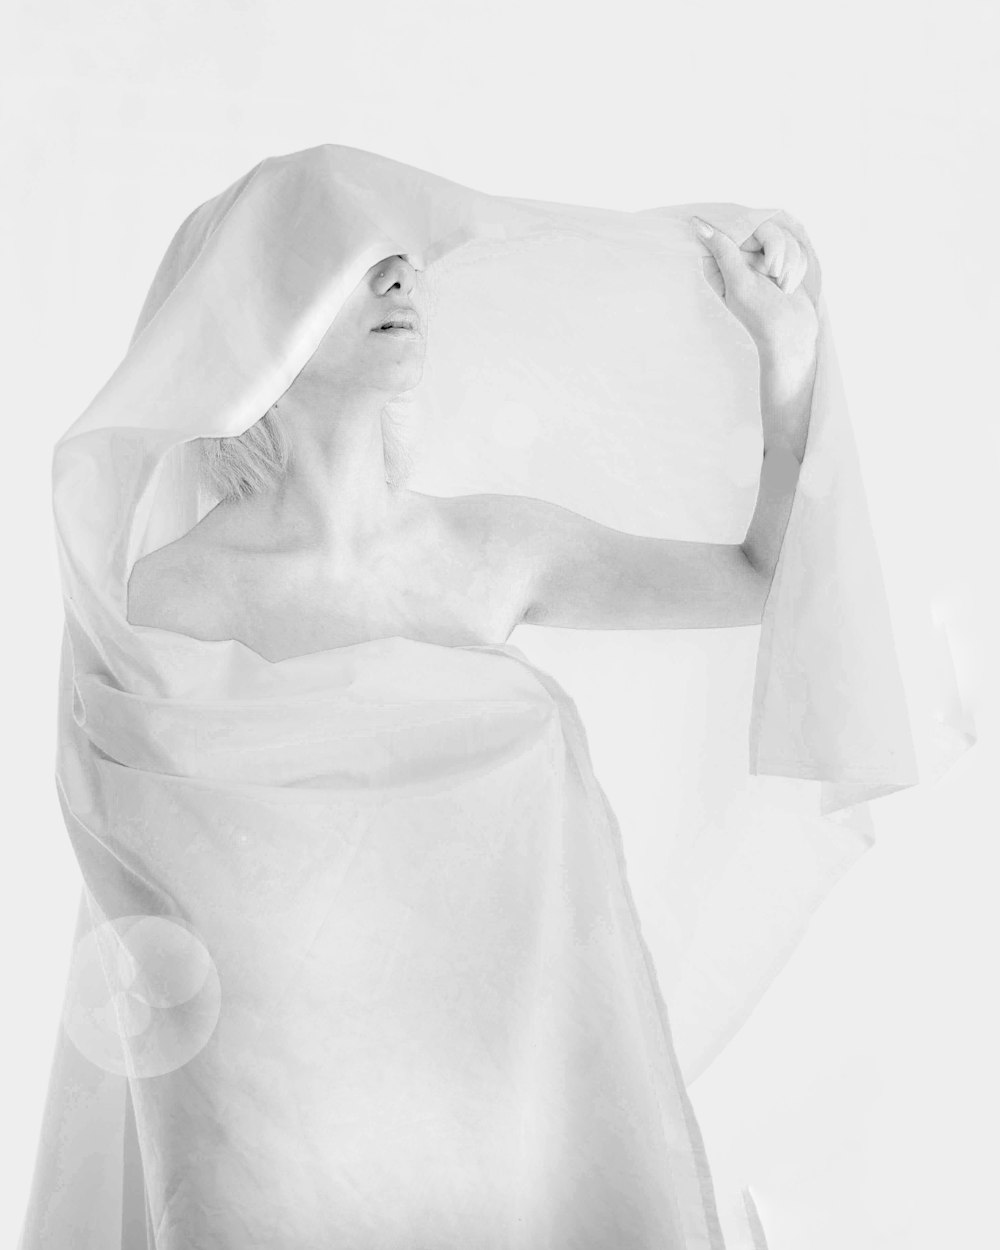 a black and white photo of a woman wrapped in a sheet